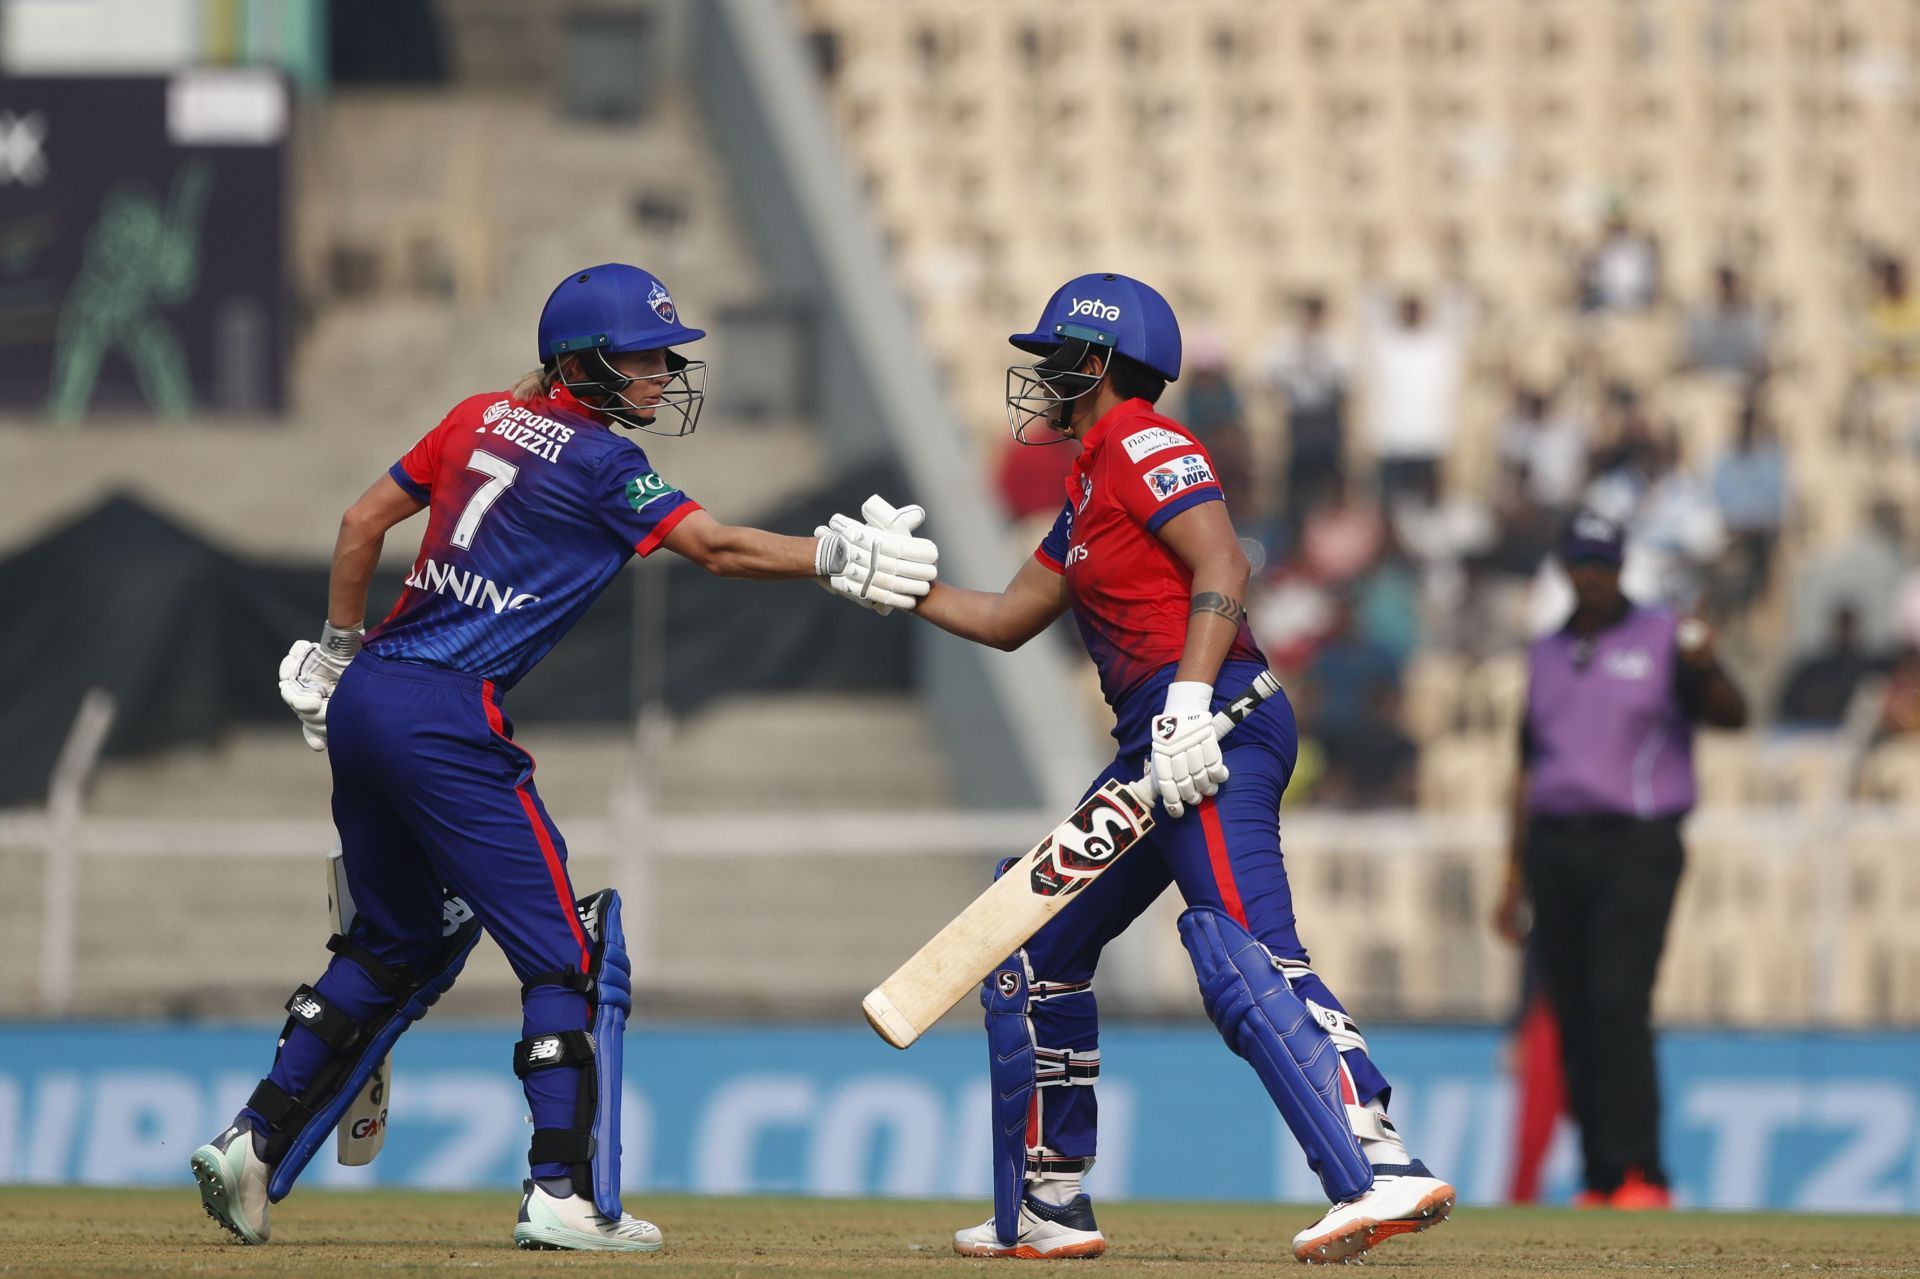 Shafali Verma and Meg Lanning in action: WPL 2023 - Royal Challengers Bangalore v Delhi Capitals